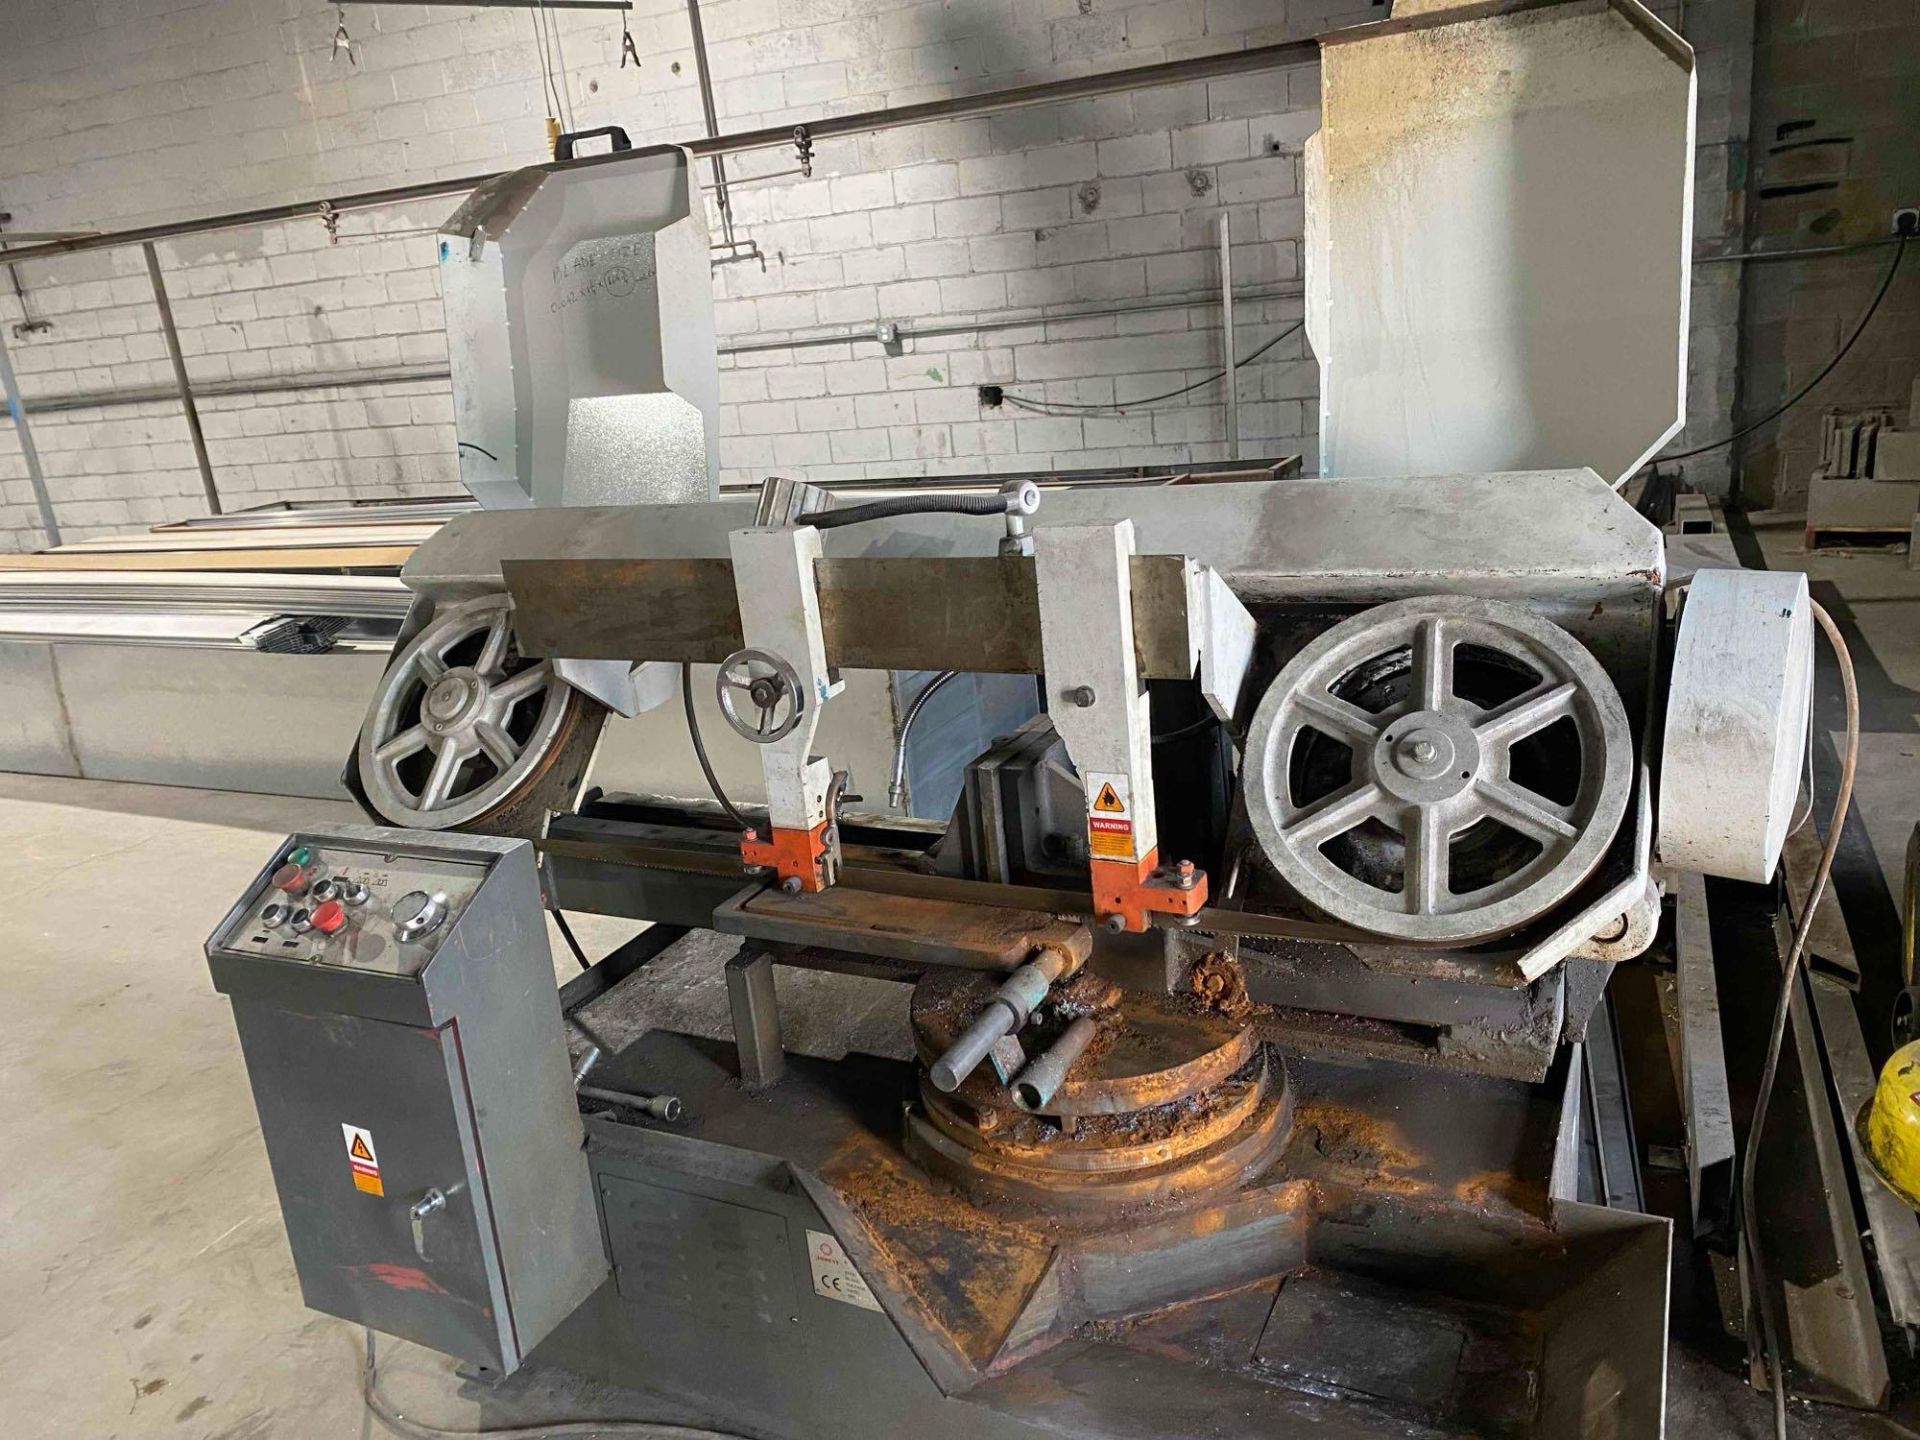 2018 Aodest GS4028 Horizontal Band Saw - Image 2 of 7